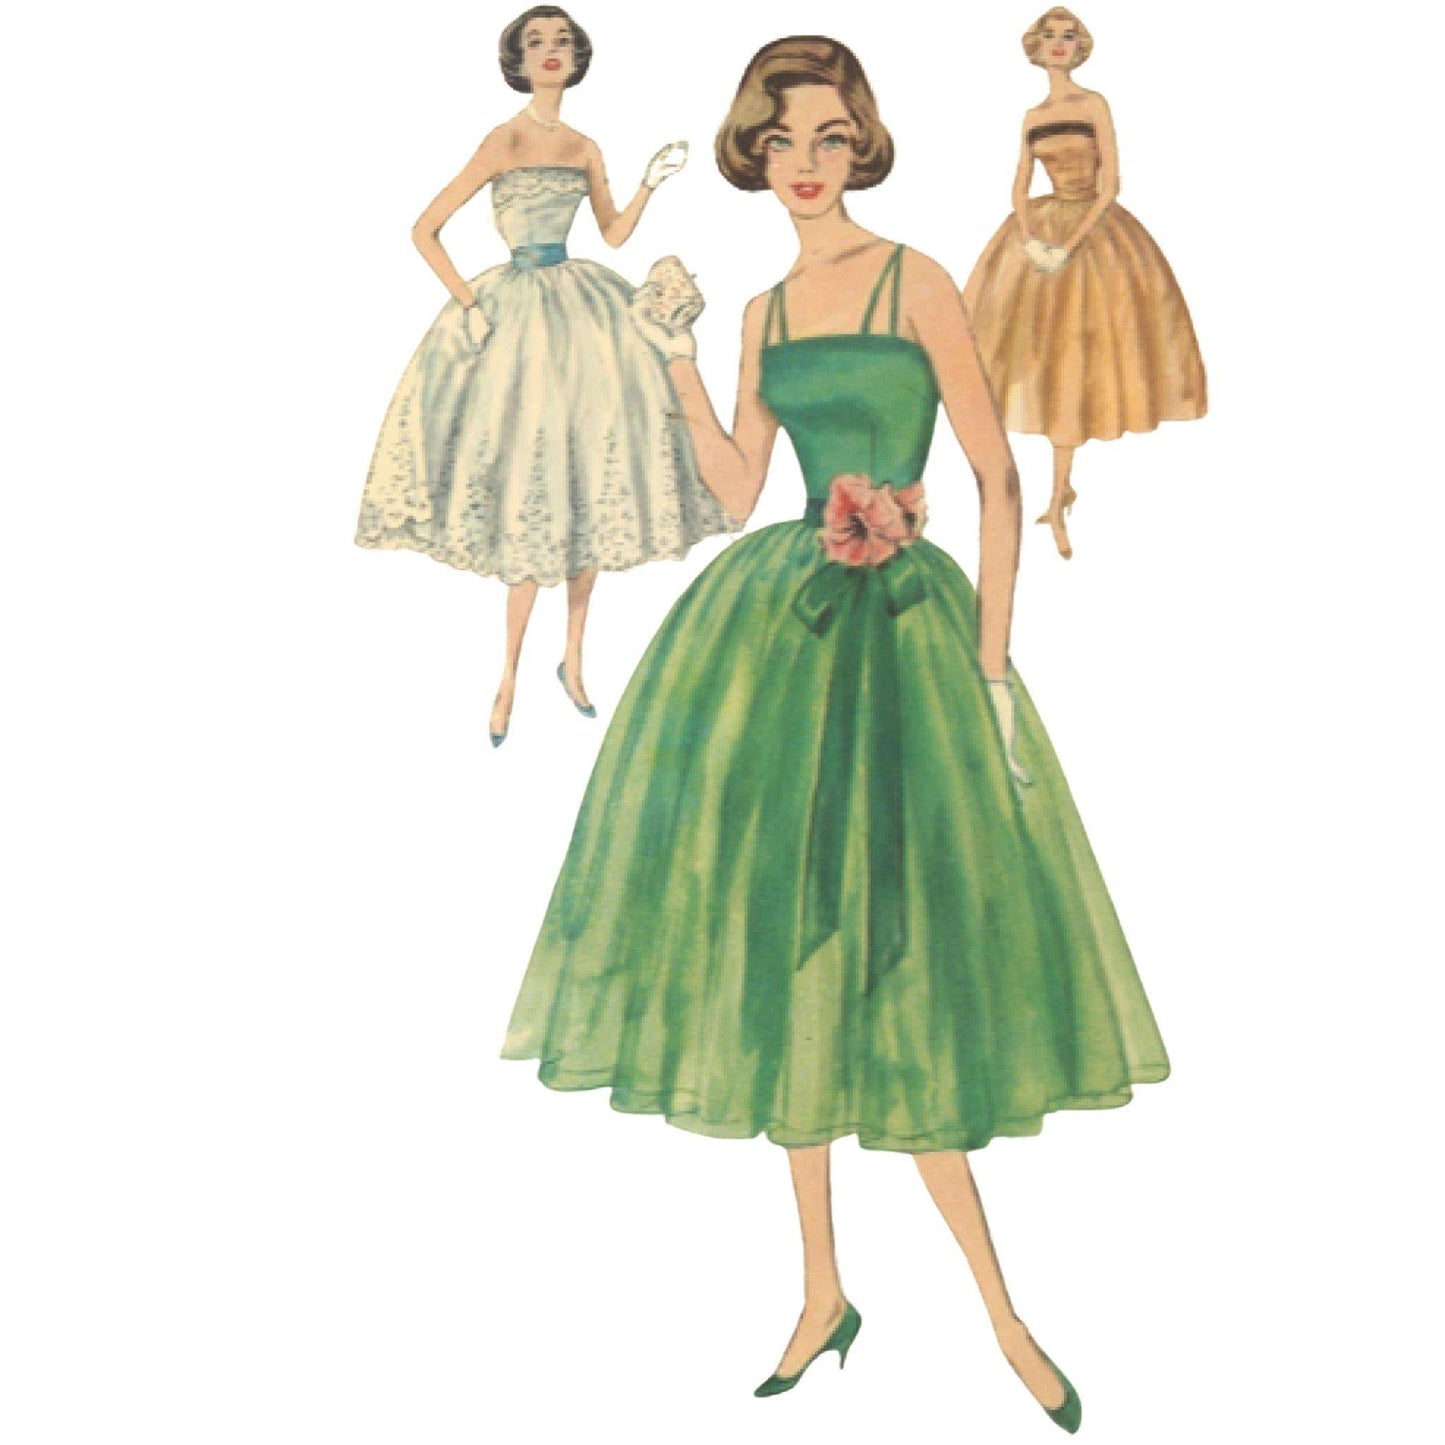 1950s Pattern, Women's Strap/Strapless Evening Dress, Gown - Bust 28 –  Vintage Sewing Pattern Company